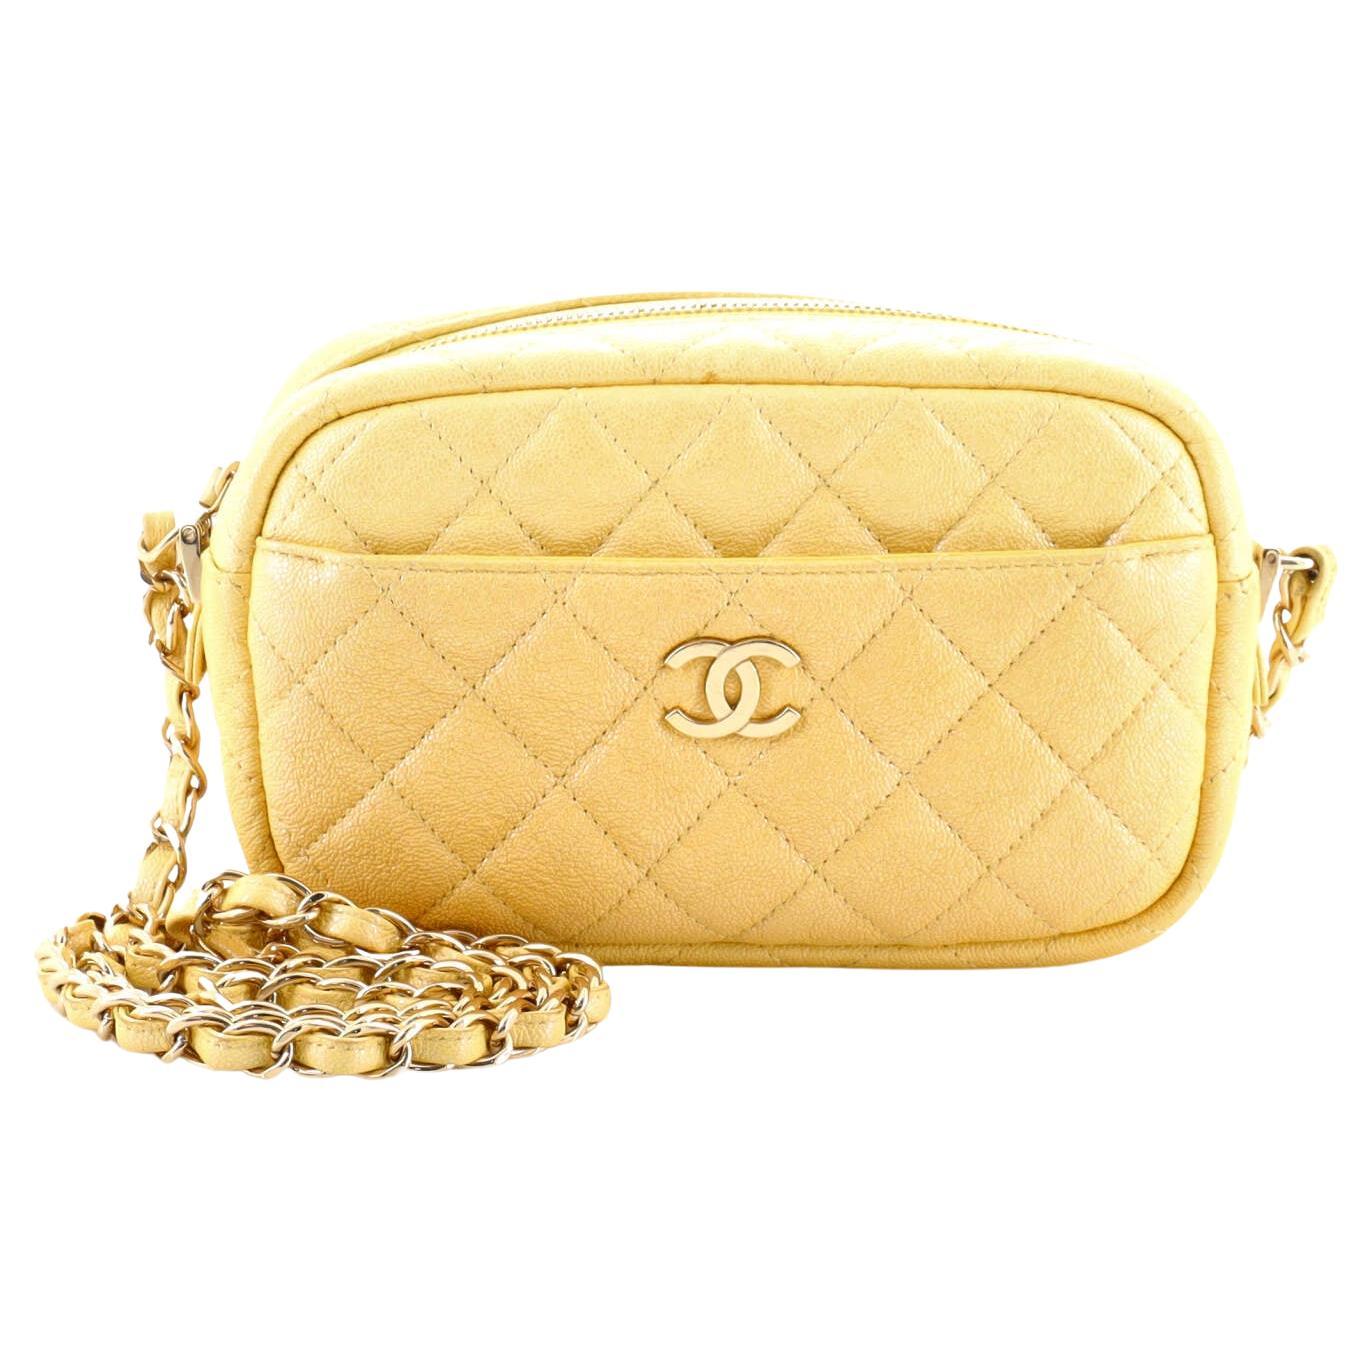 Chanel Camera Case Bag Quilted Iridescent Caviar Mini